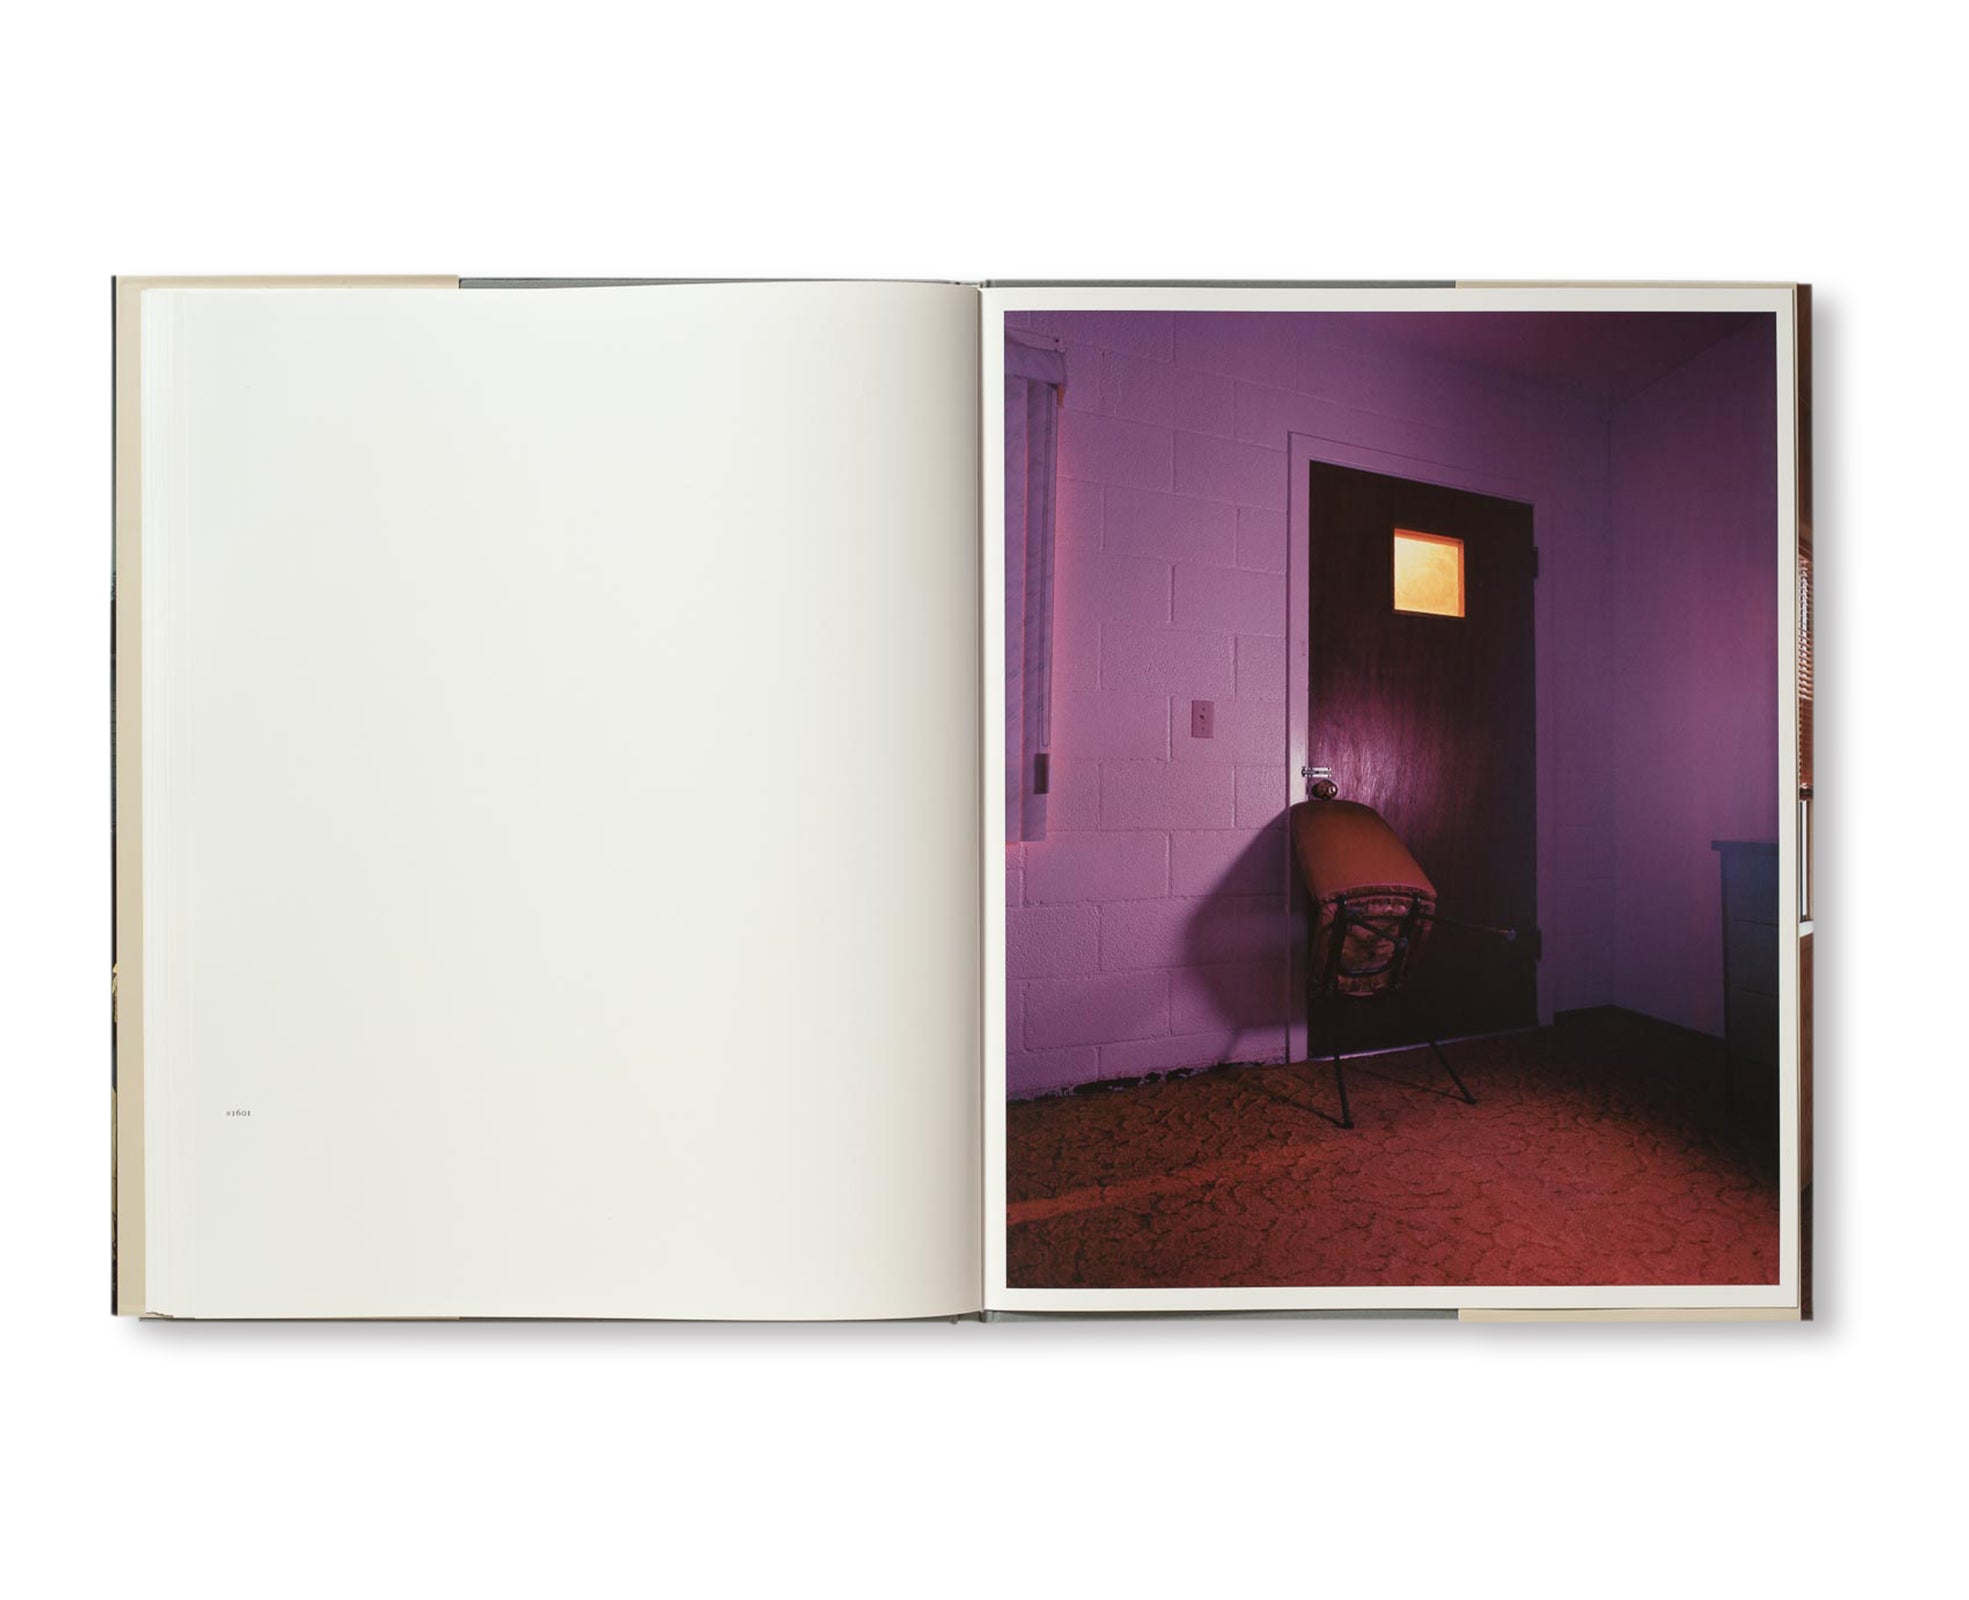 HOUSE HUNTING by Todd Hido [DELUXE EDITION]